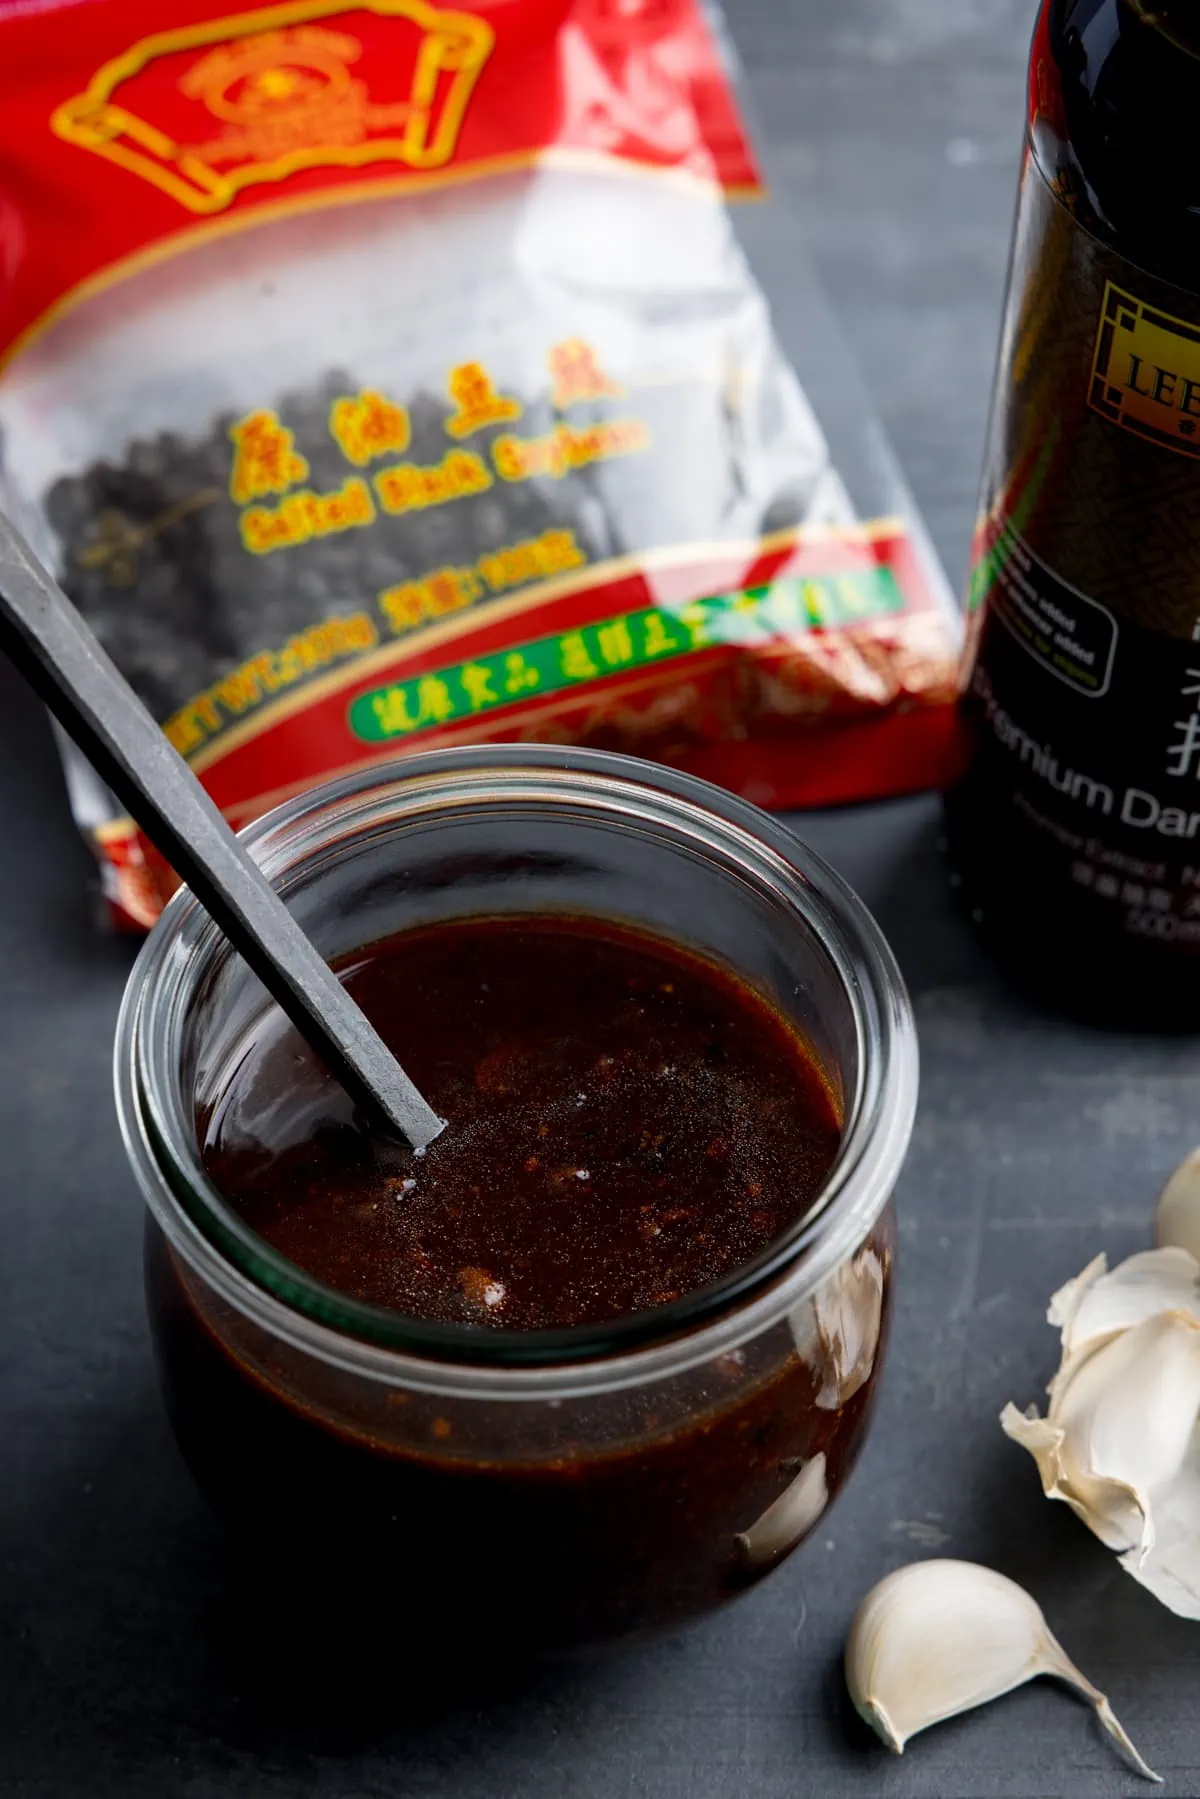 A glass jar filled with homemade black bean sauce. There is a black spoon sticking out of the jar. The jar is on a dark surface and there are ingredients at the bottom.